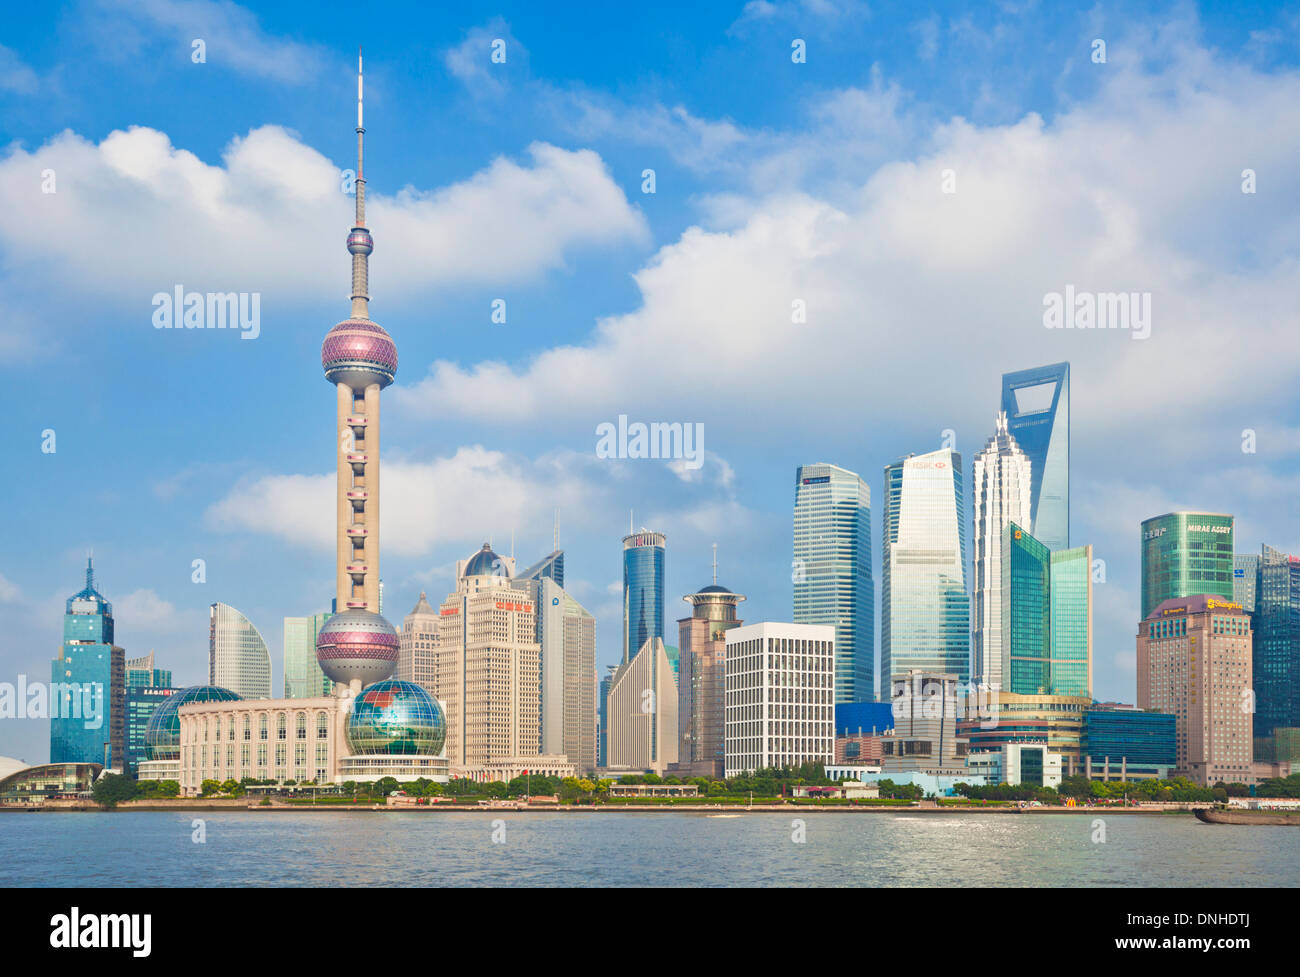 shanghai skyline with the world financial center and oriental pearl buildings the Pudong PRC, People's Republic of China, Asia Stock Photo